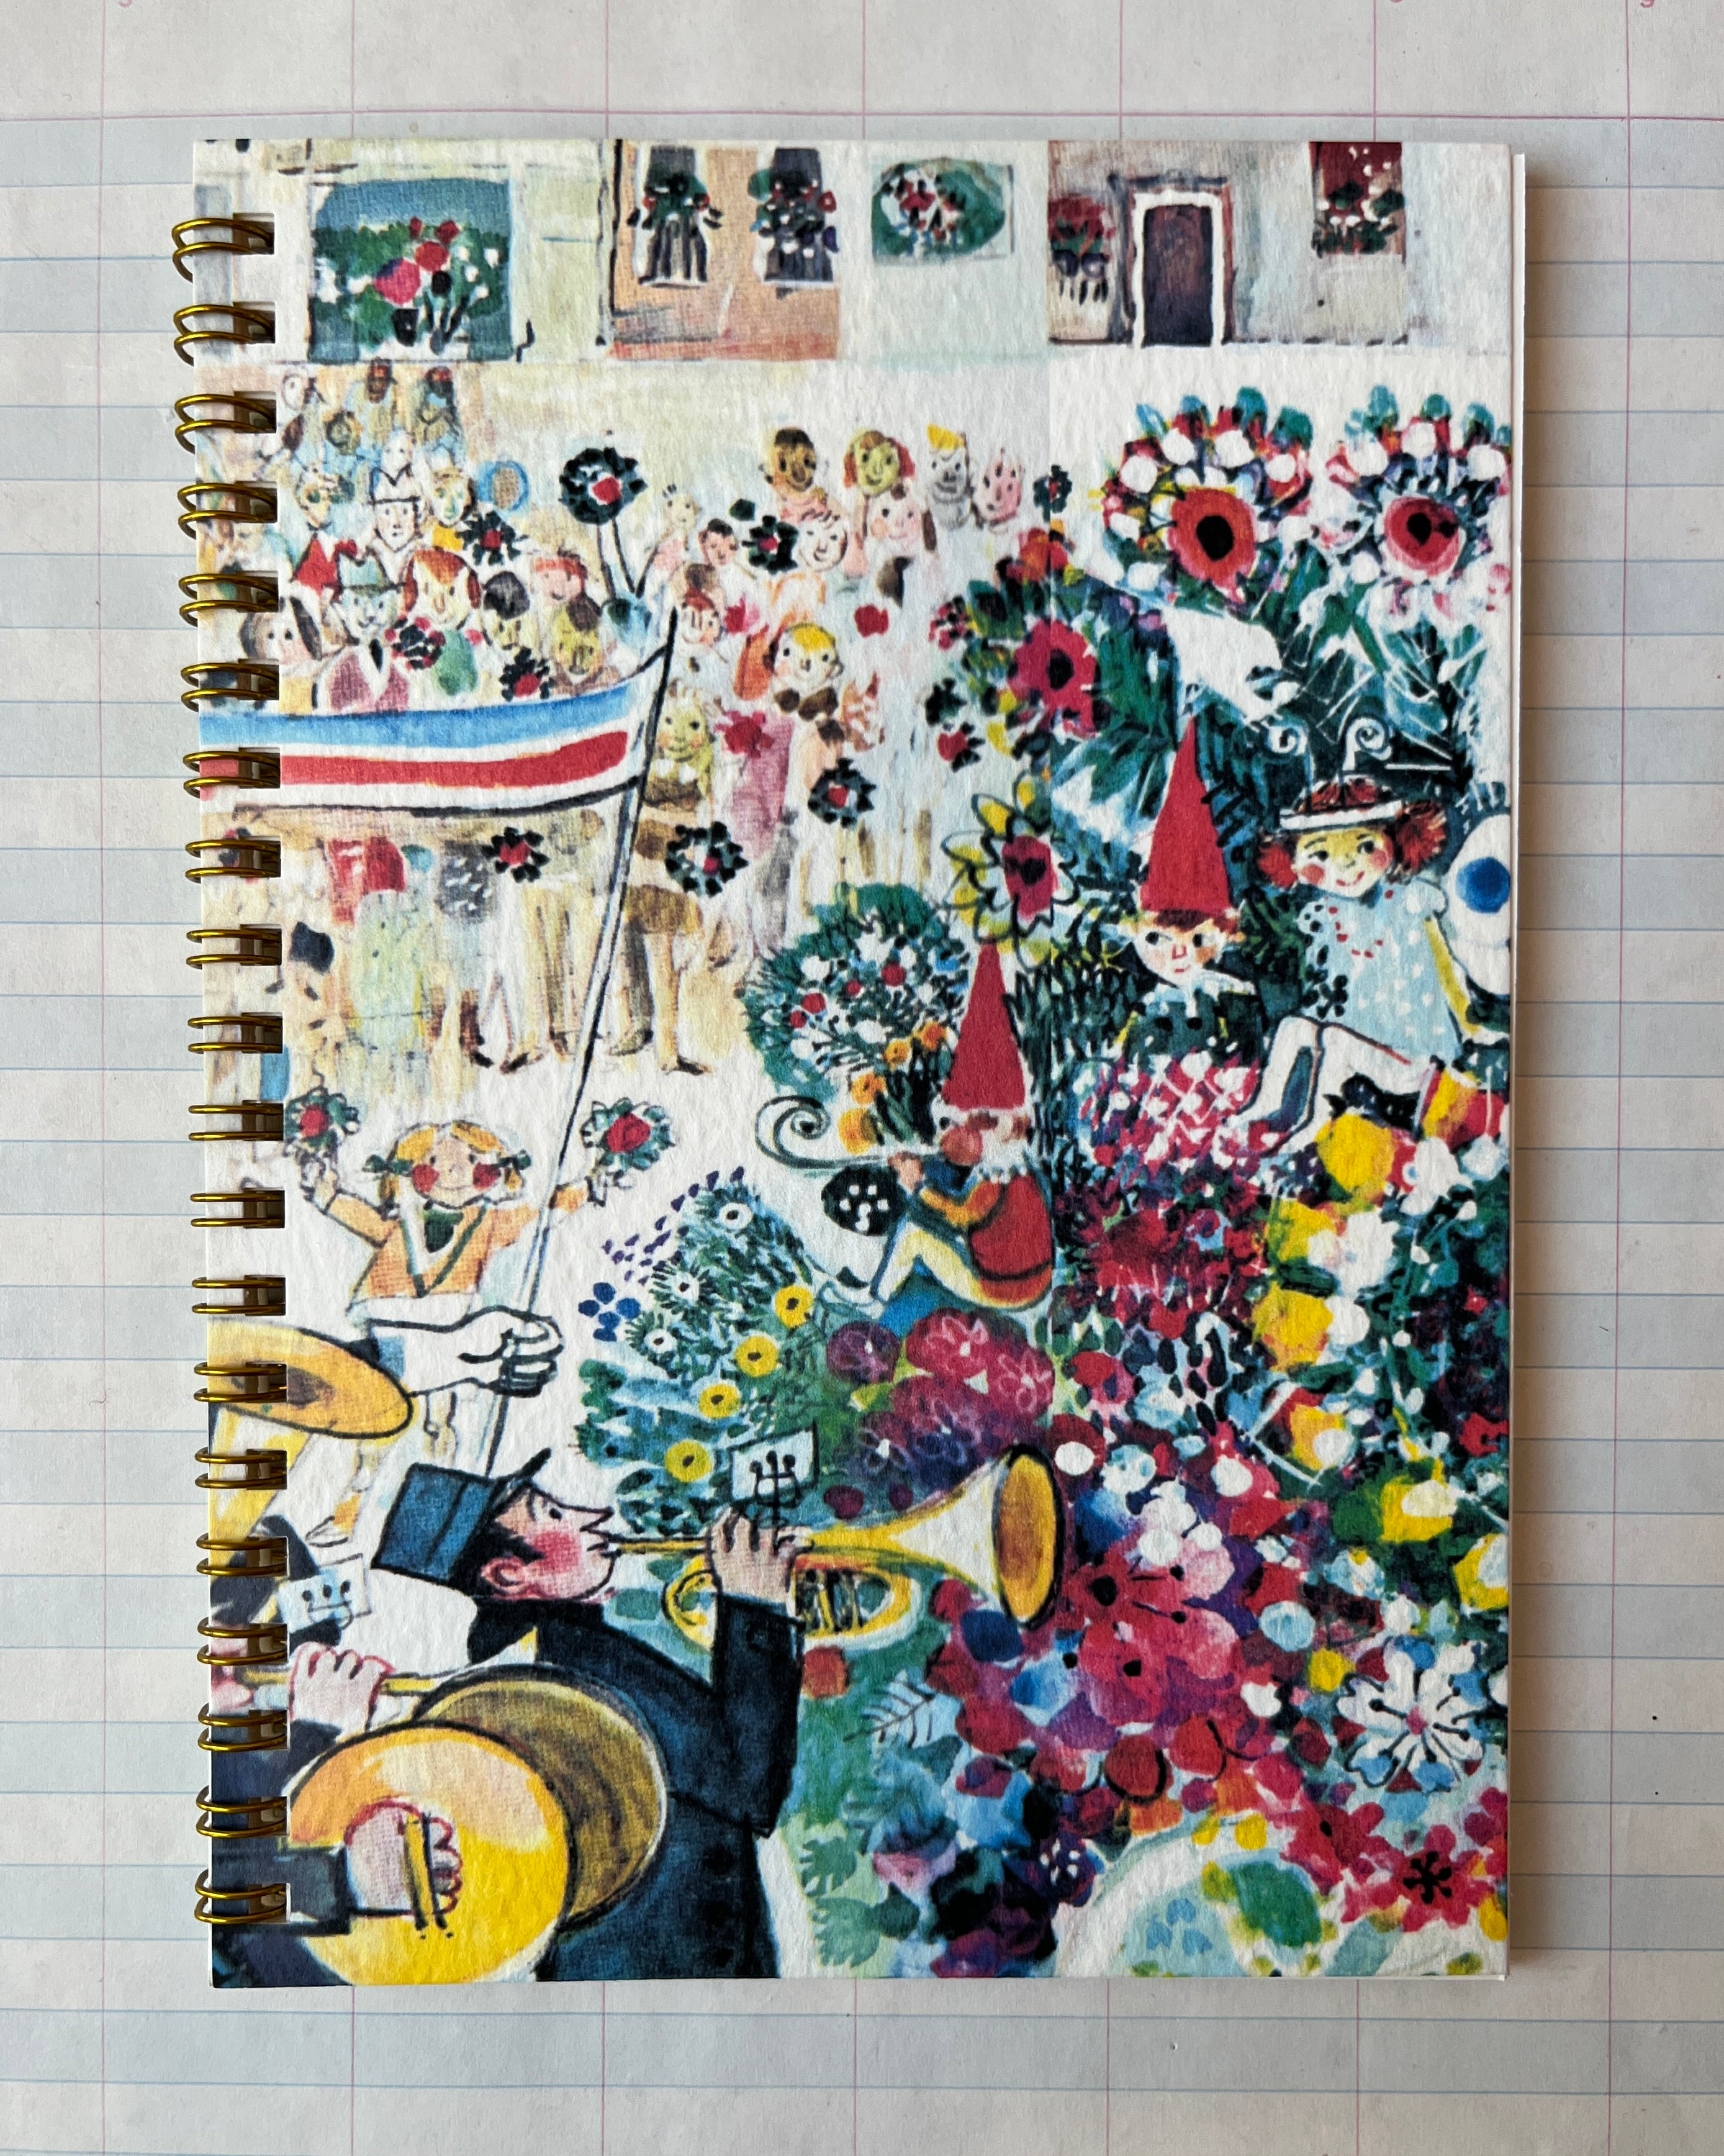 Join the Happy Parade Notebooks